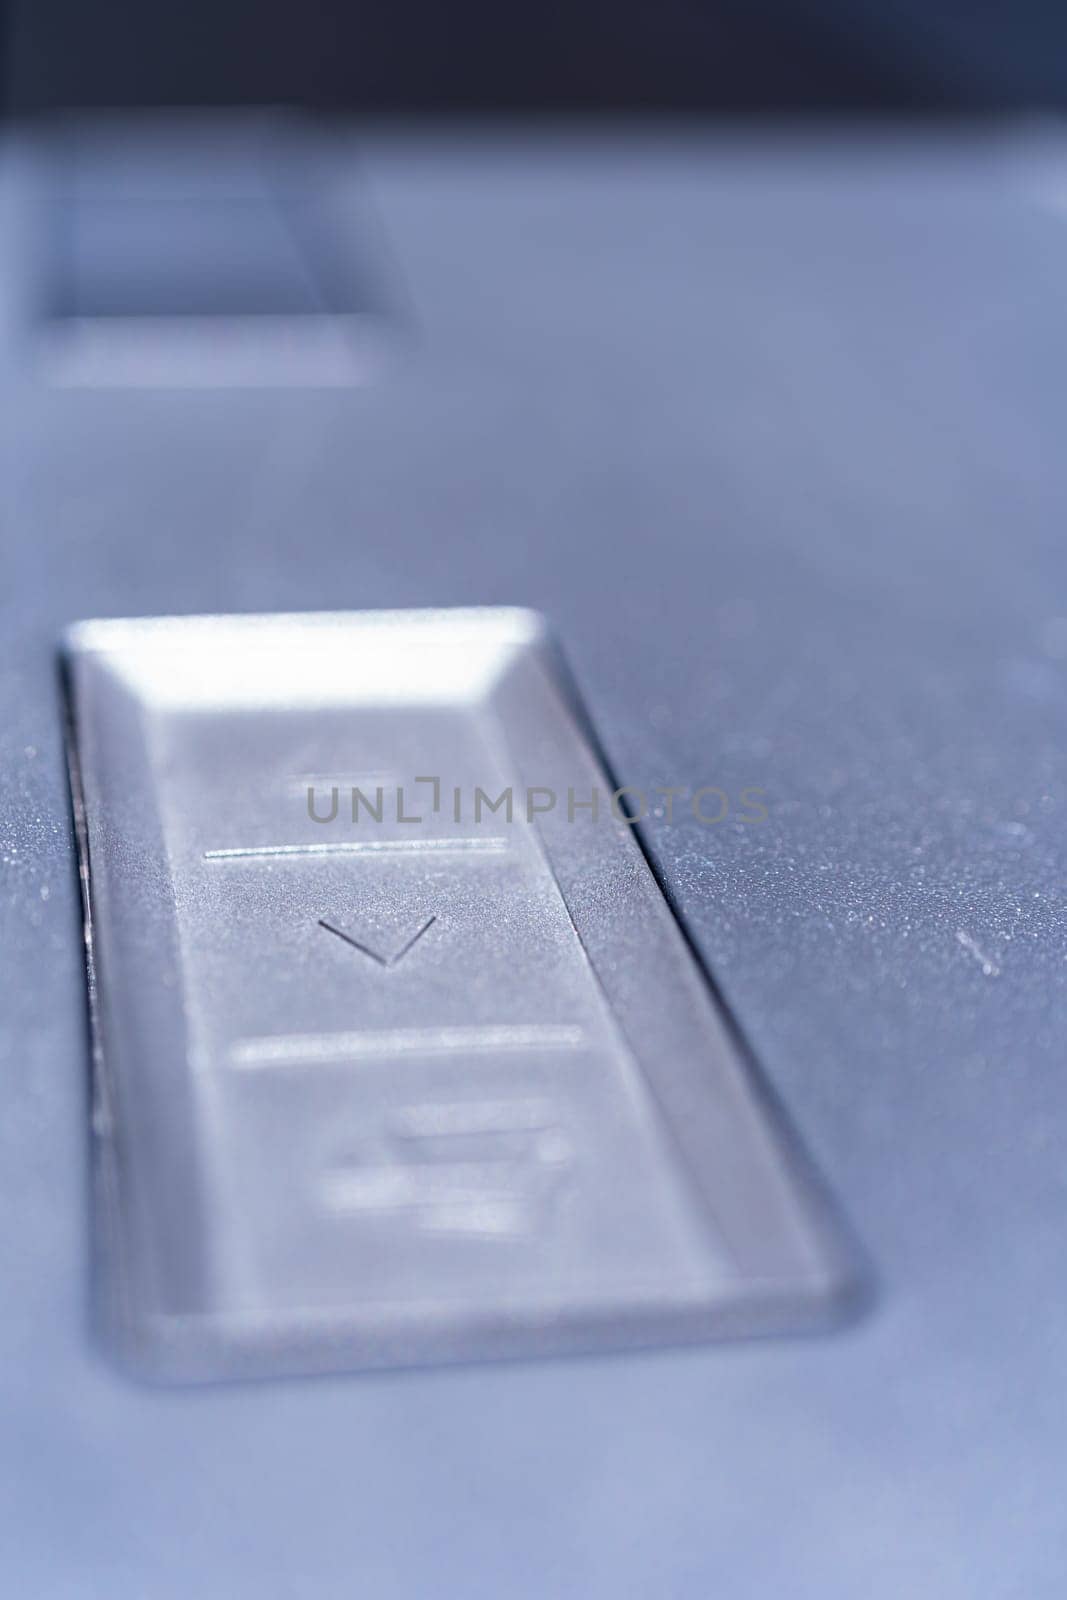 Denver, Colorado, USA-May 5, 2024-This image captures a close-up view of the control buttons used for operating the tailgate and tonneau cover of a Tesla Cybertruck, highlighting the futuristic and functional design elements.